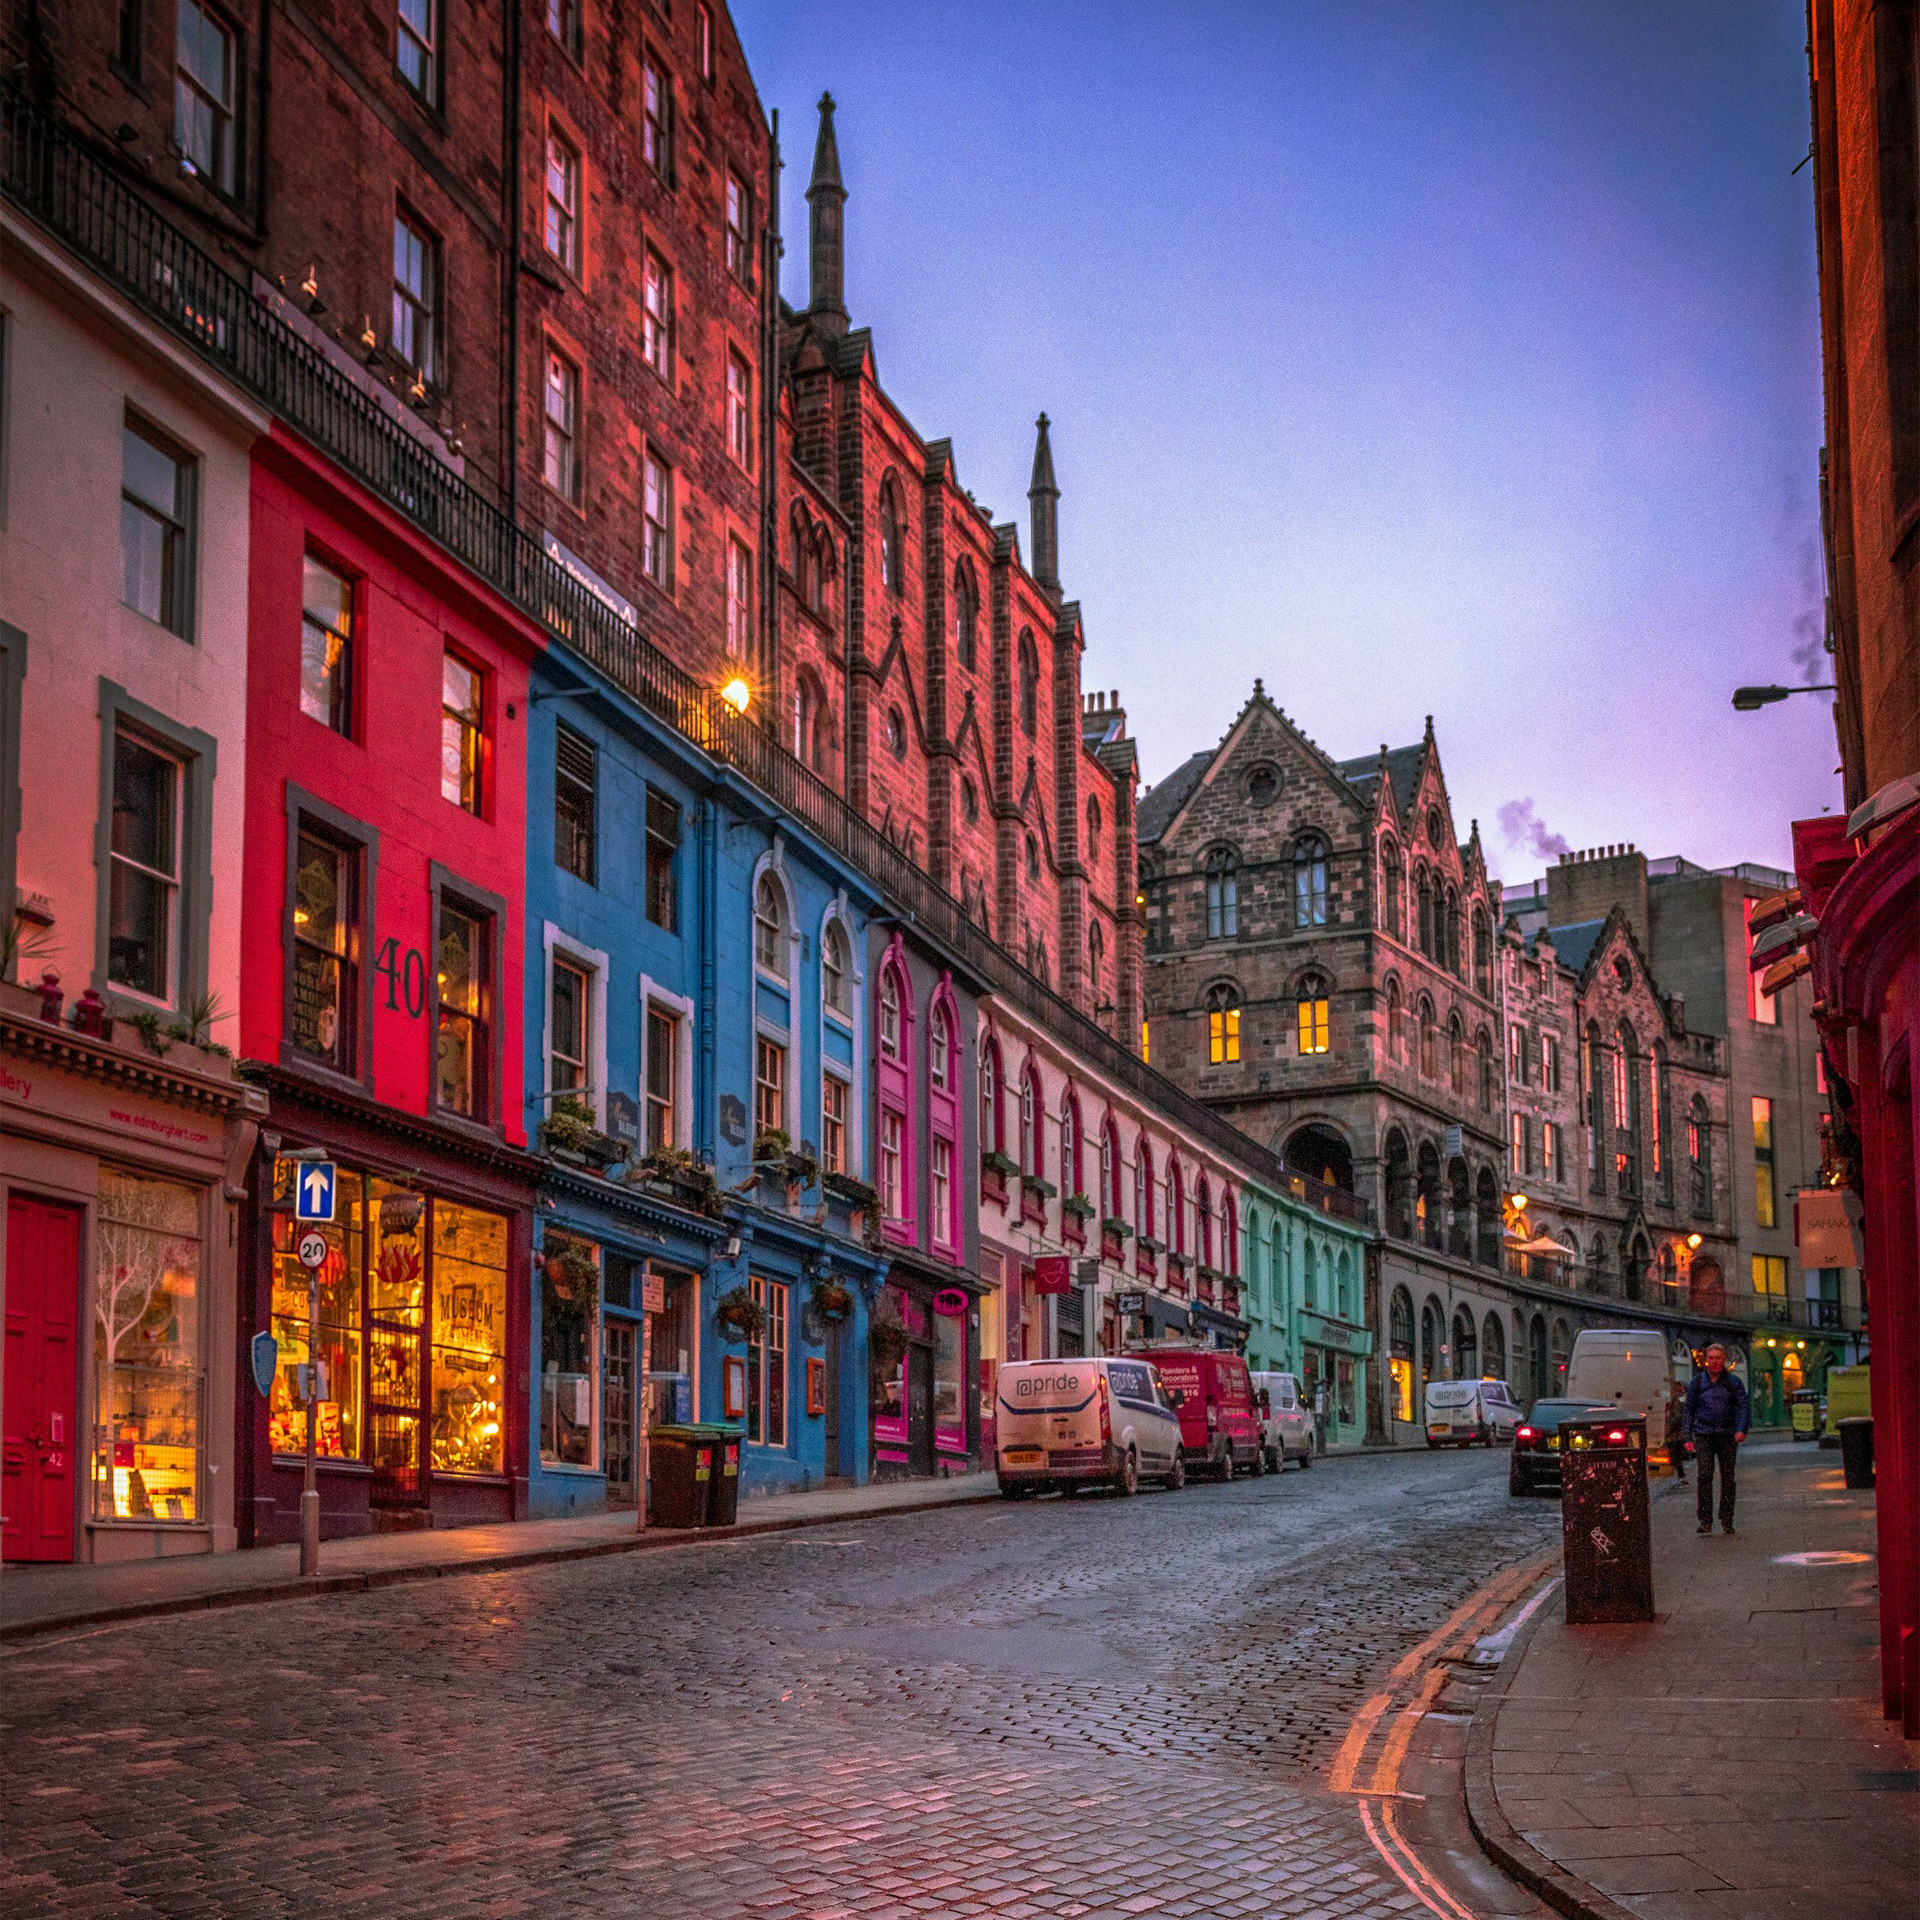 Photograph of narrow European Streets at dusk, taken by photographer Jim DIvine